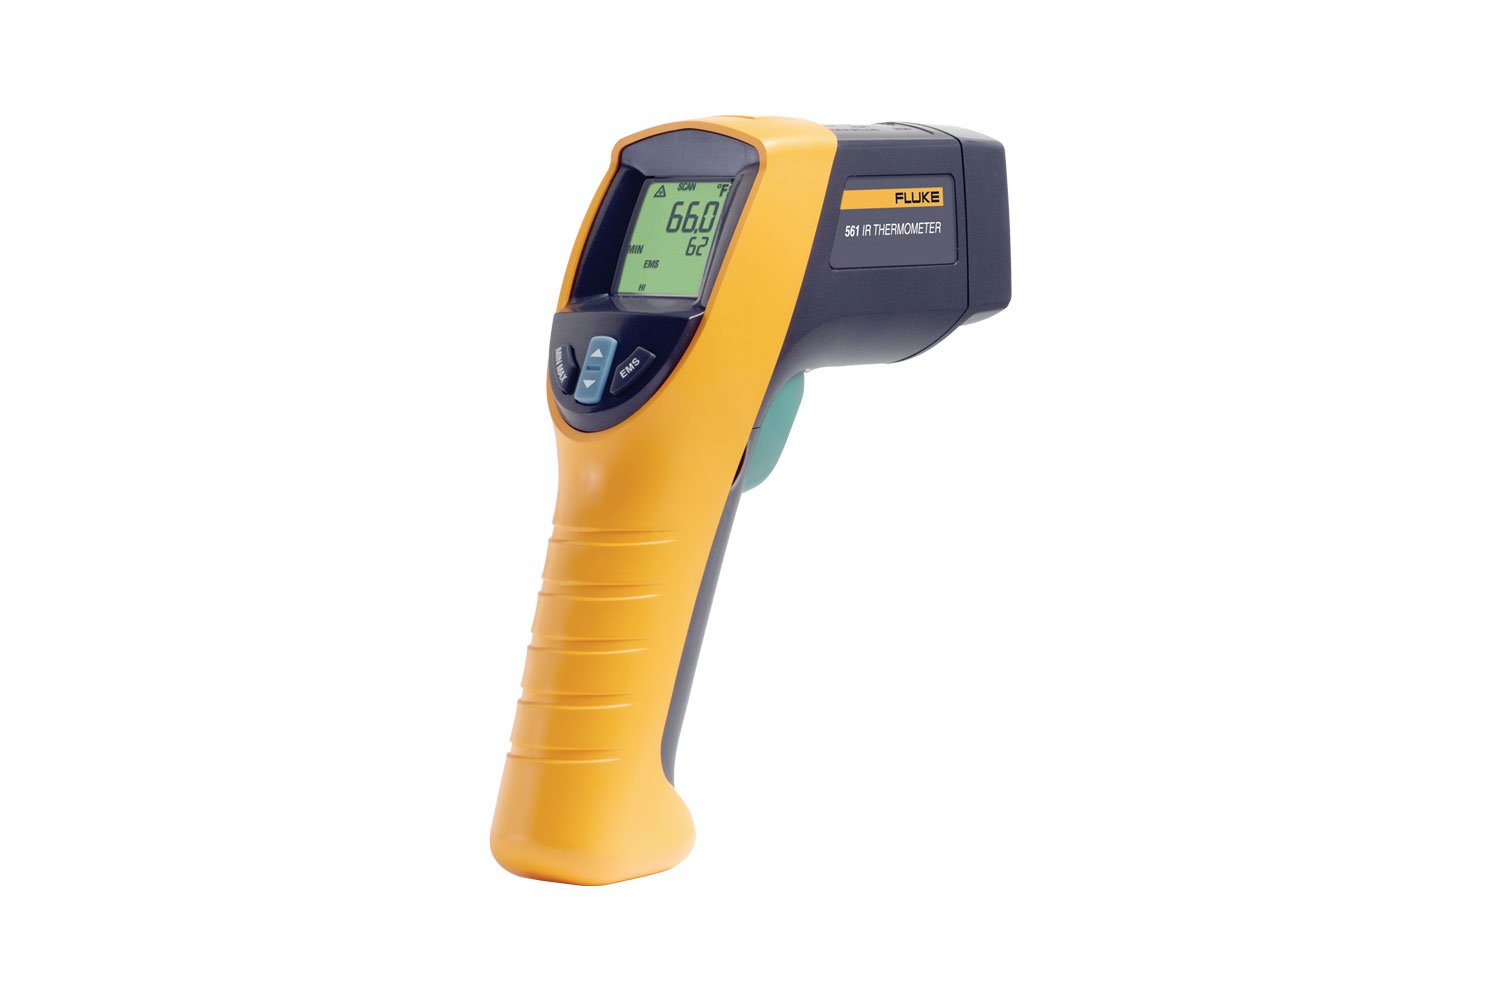 561 Infrared and Contact Thermometer, temperature measurement device offering non-contact infrared method